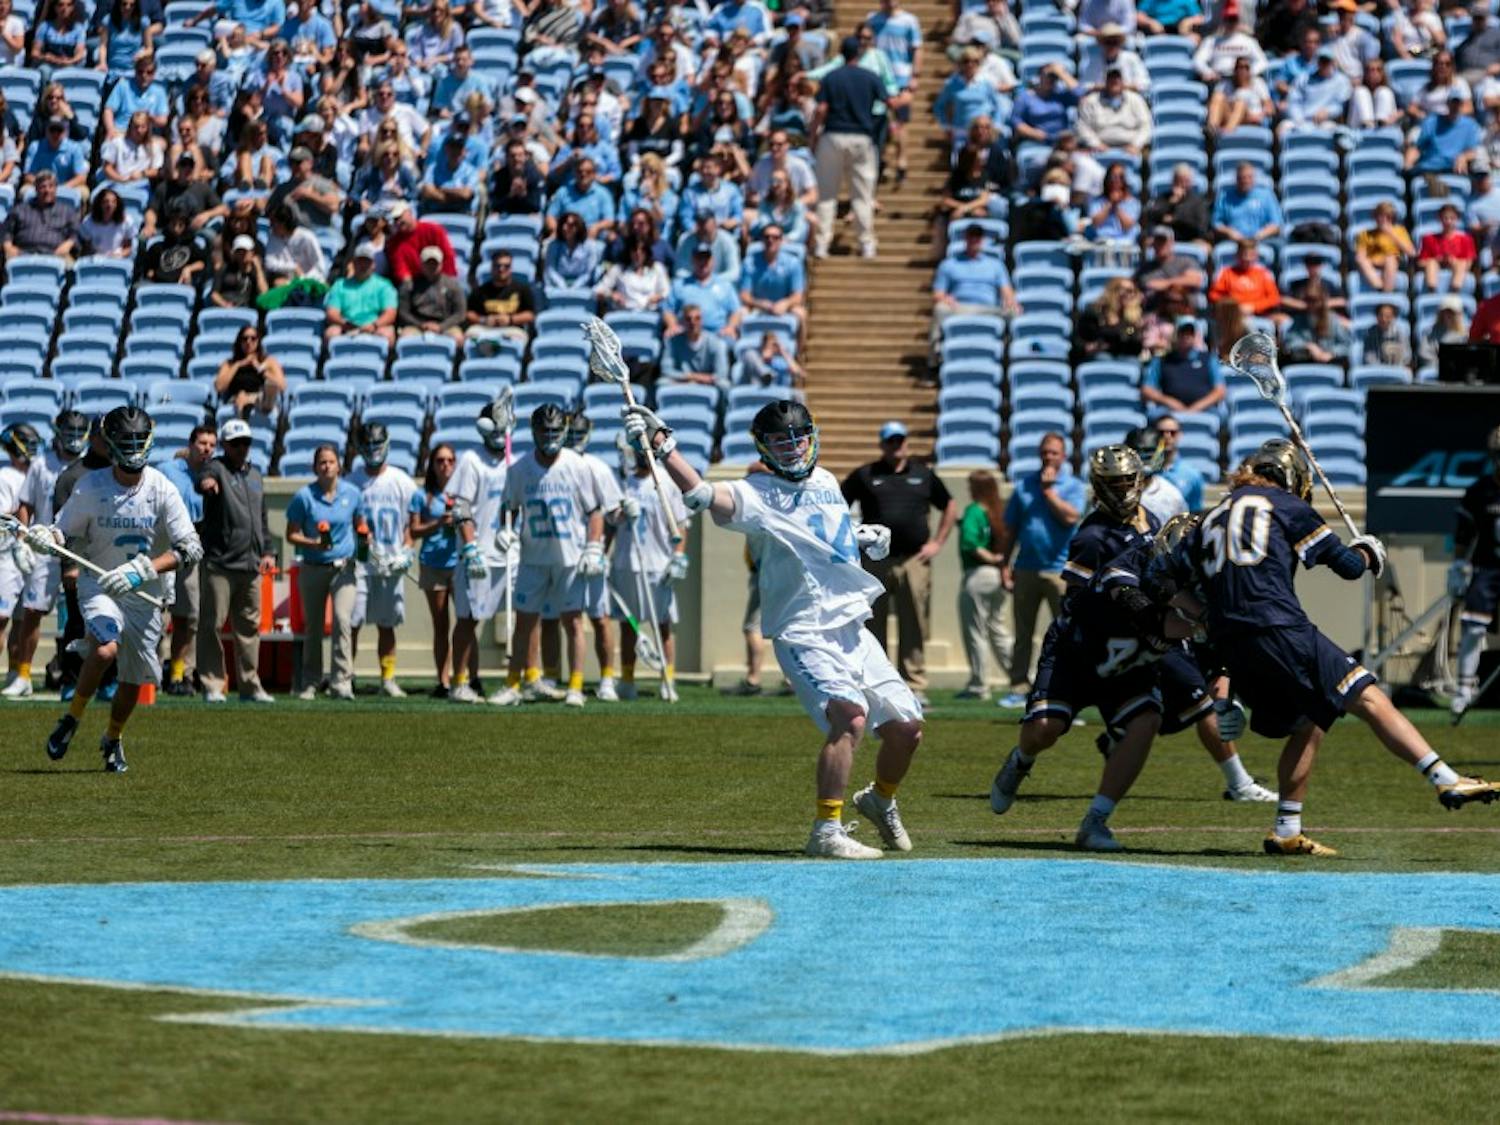 UNC's William McBride (14) calls for the ball against Notre Dame on April 20 at Kenan Stadium.